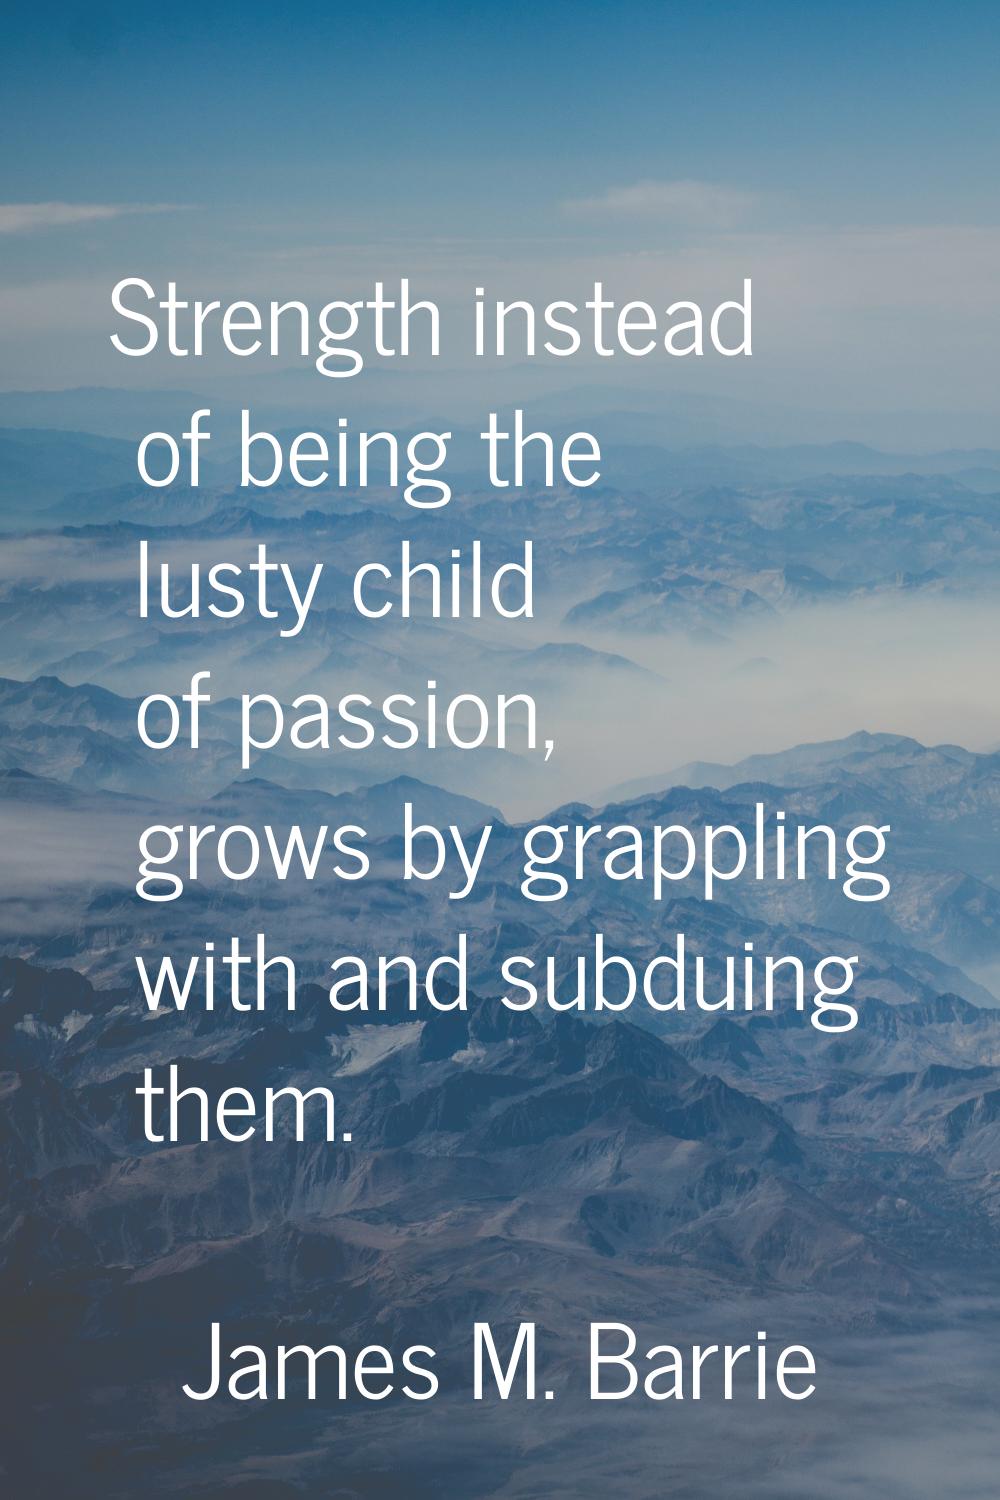 Strength instead of being the lusty child of passion, grows by grappling with and subduing them.